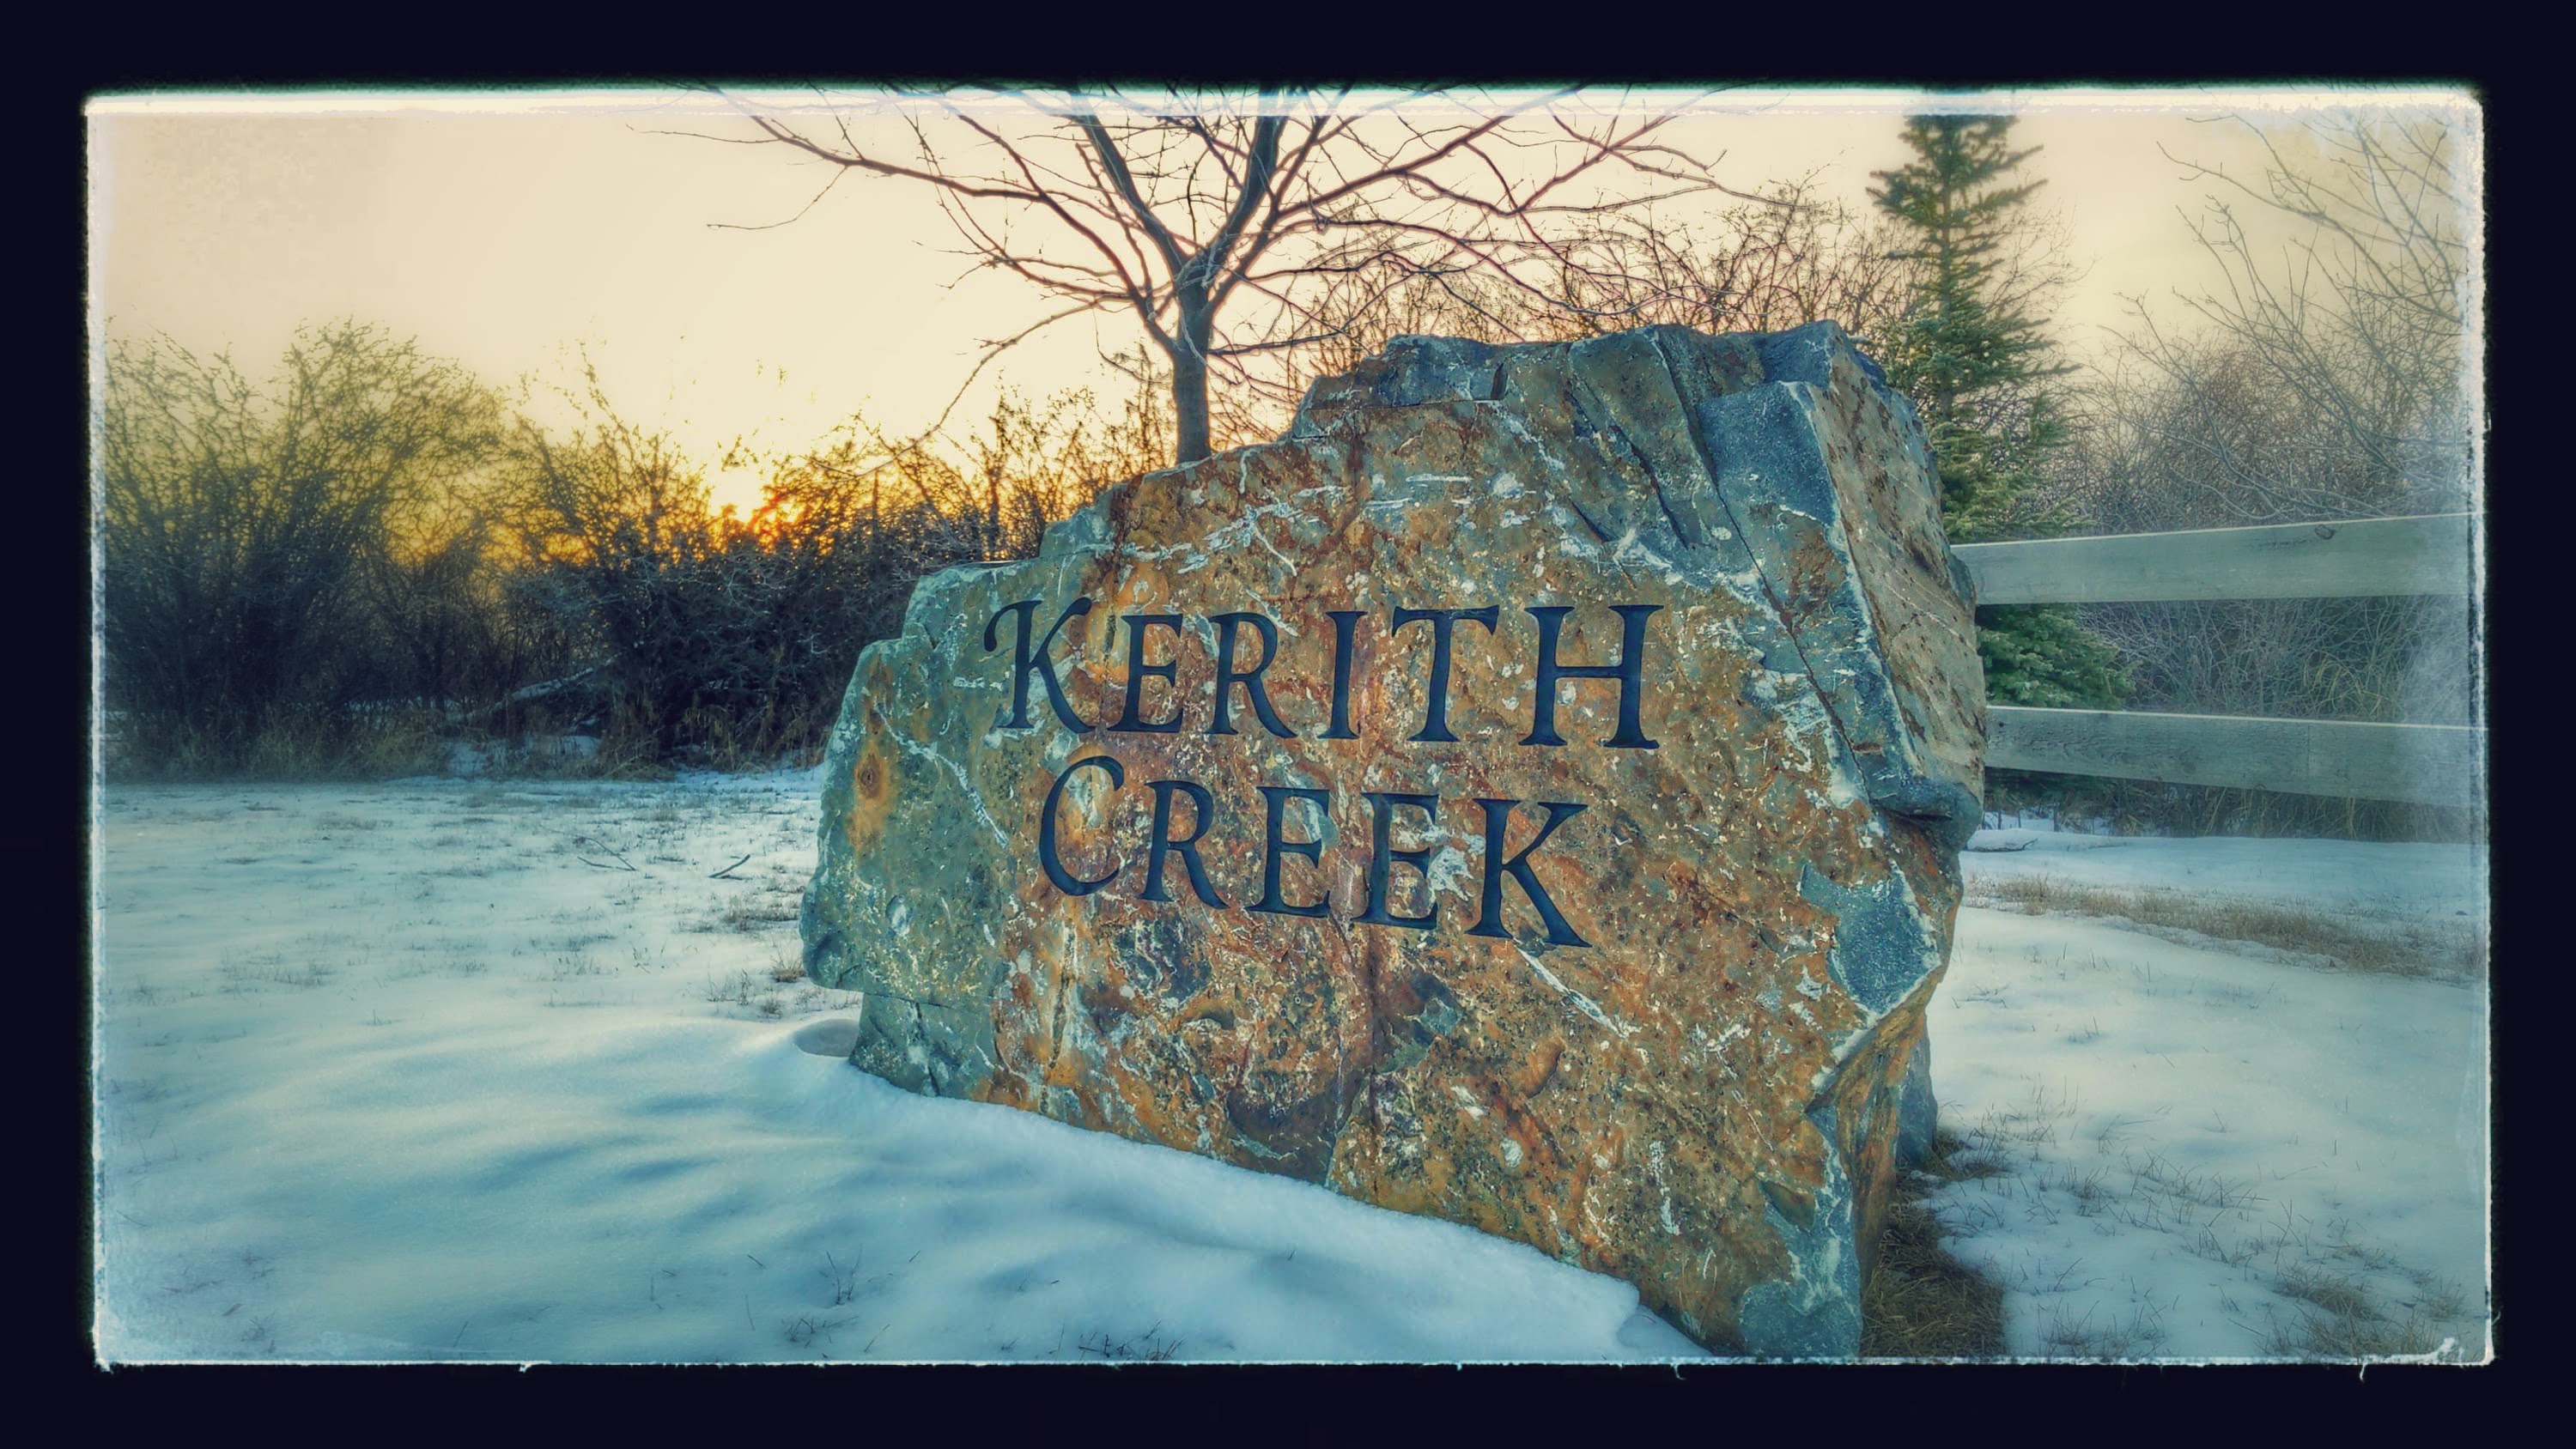 Kerith Creek – Retreat for full-time ministry workers